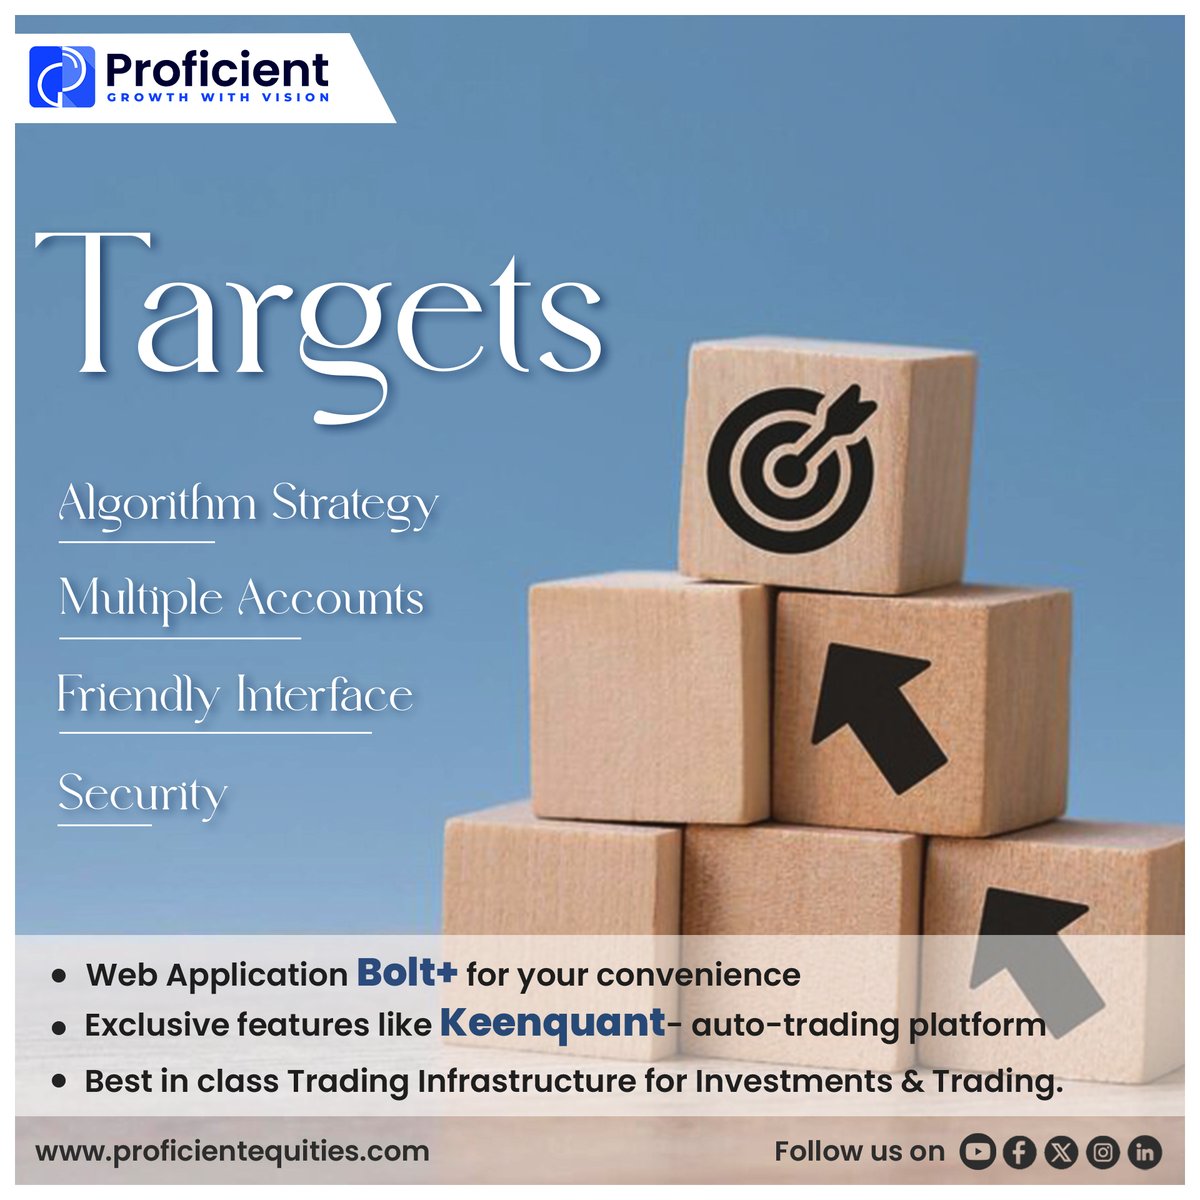 Join Proficient Equities for cutting-edge trading tools like Bolt+ and Keenquant.  Let's hit those targets together! 💼💹 #ProficientEquities #TradingRevolution